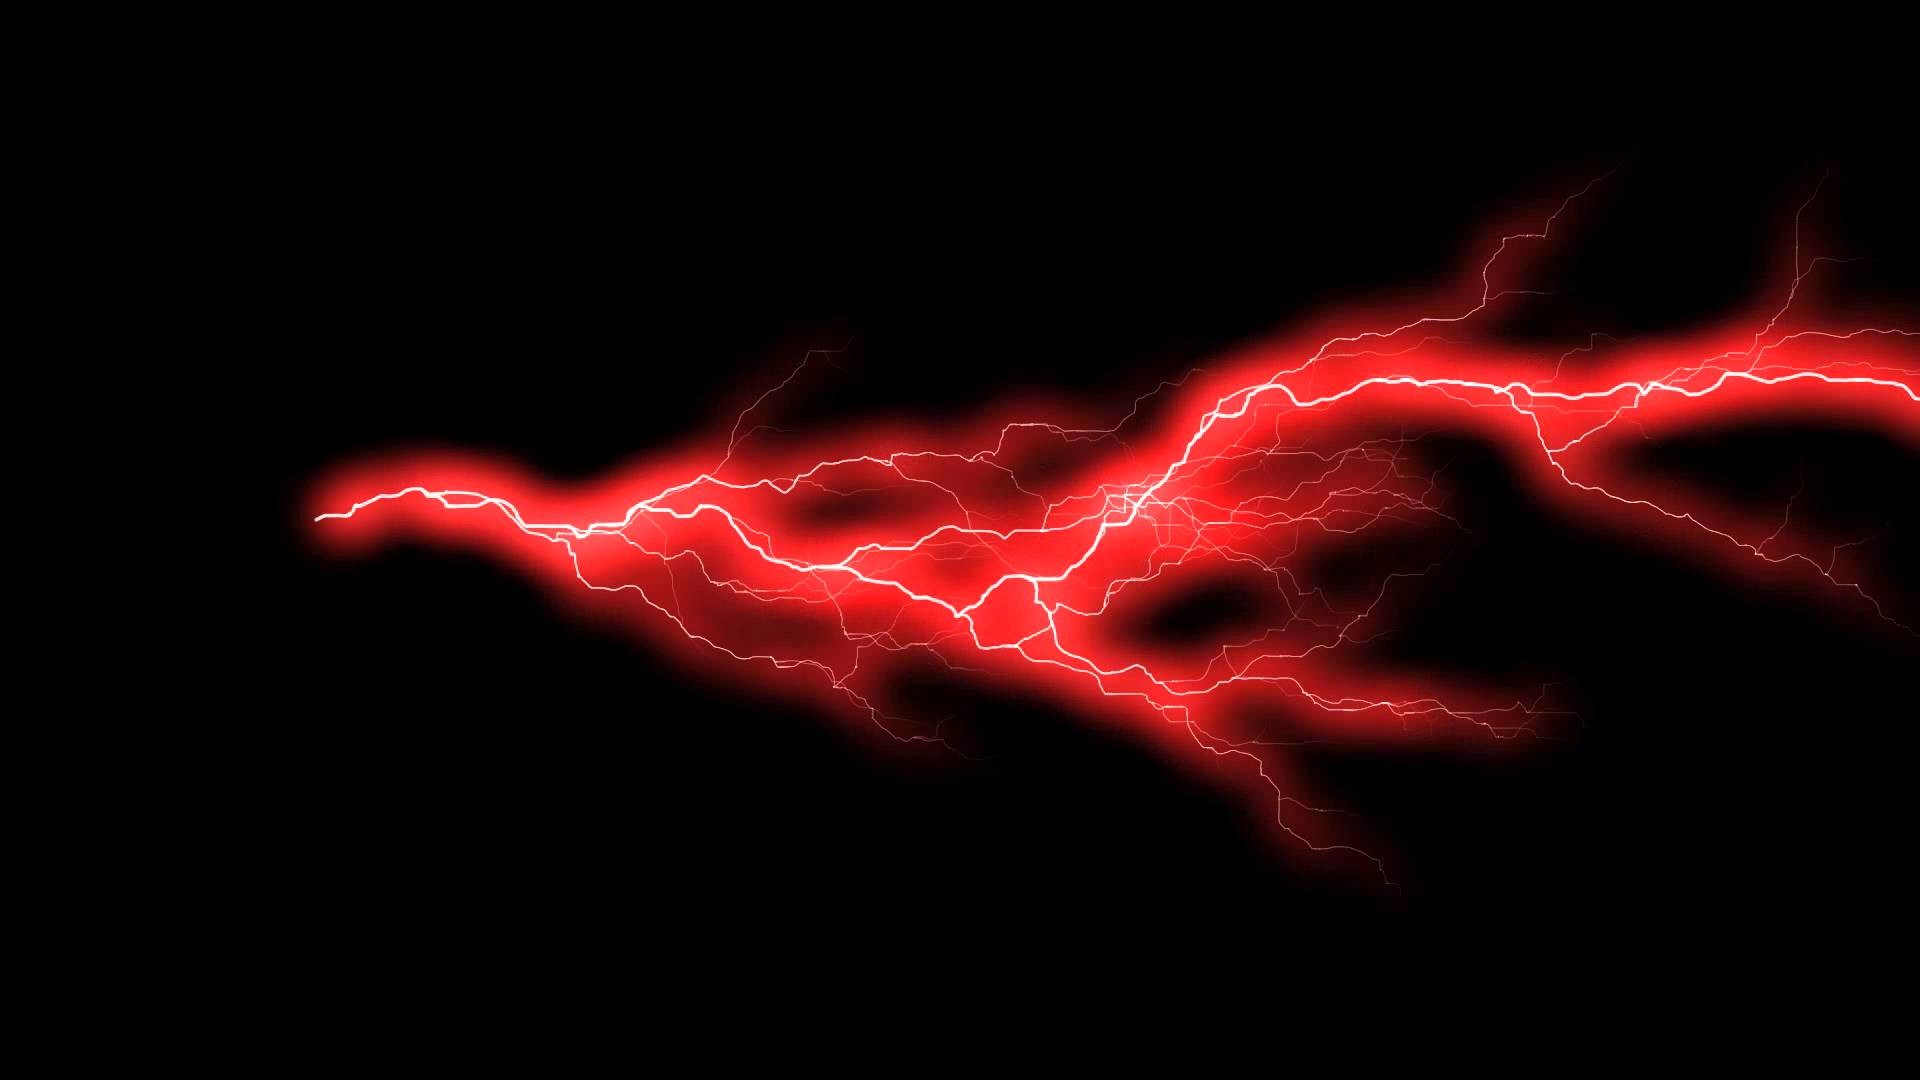 Force Lightning Red Animation 2 FREE FOOTAGE HD YouTube